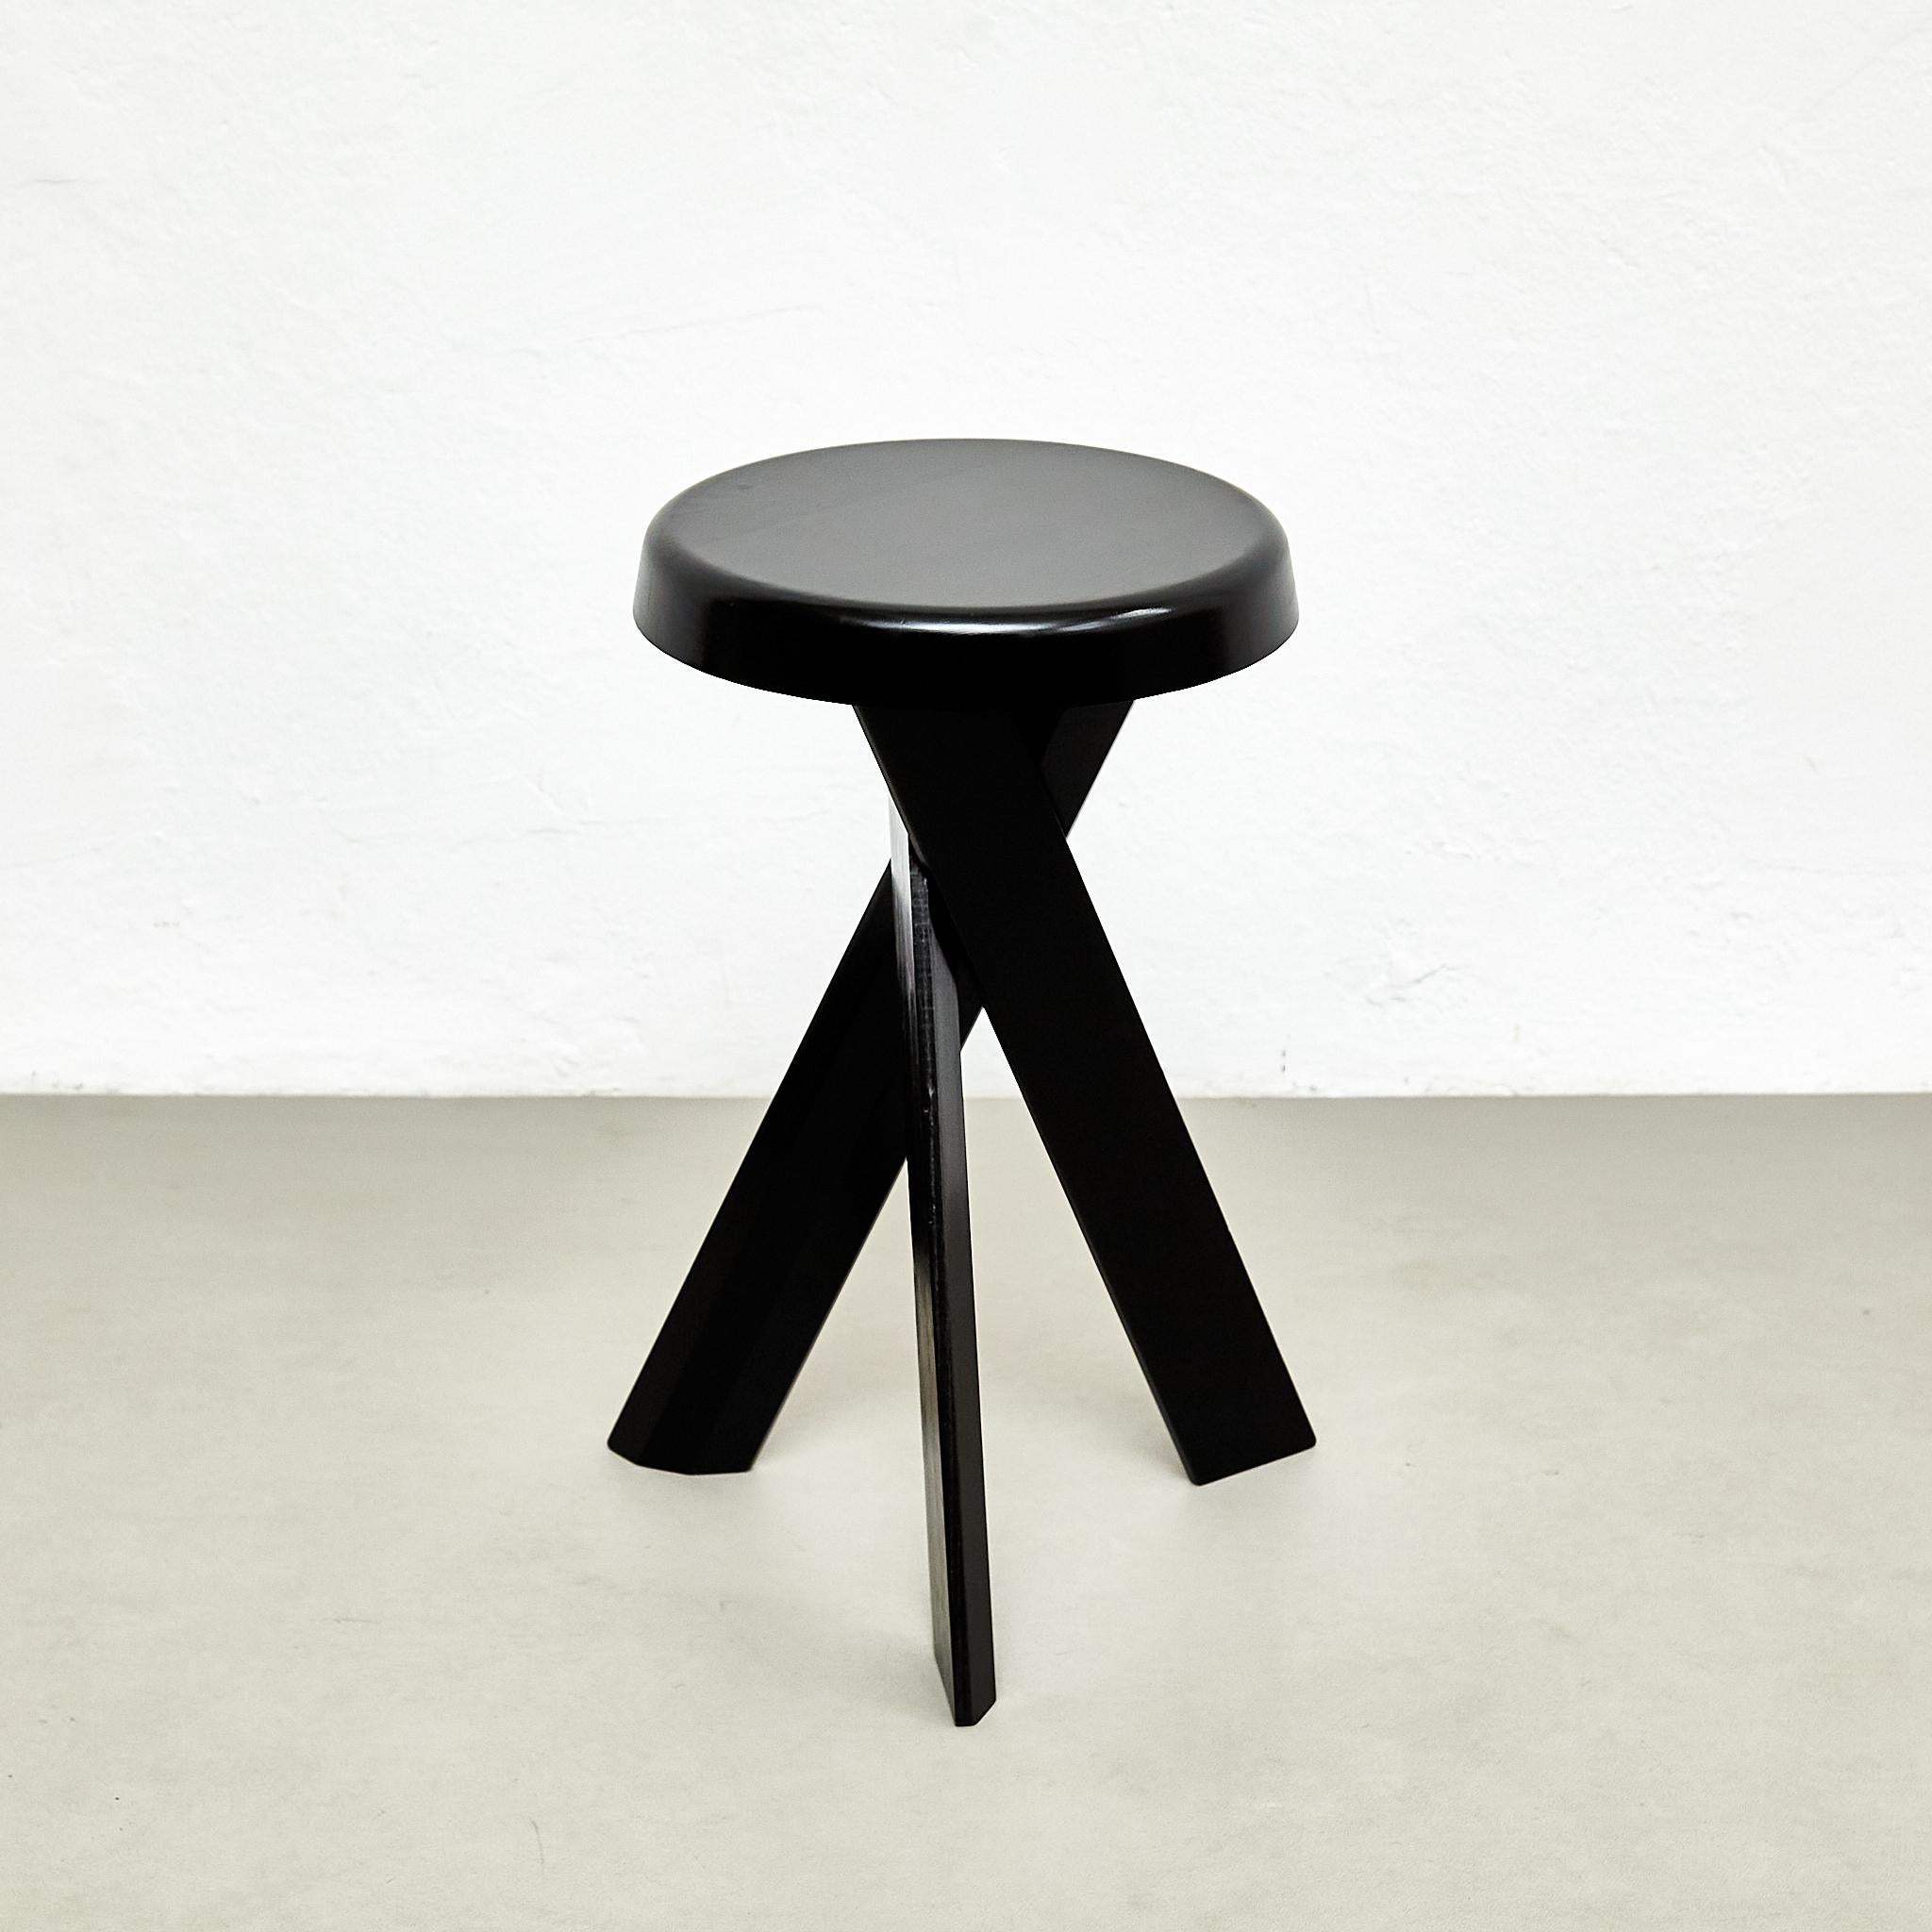 Mid-Century Modern Exclusive Pierre Chapo S31b Black Edition Stool, a Timeless French Masterpiece